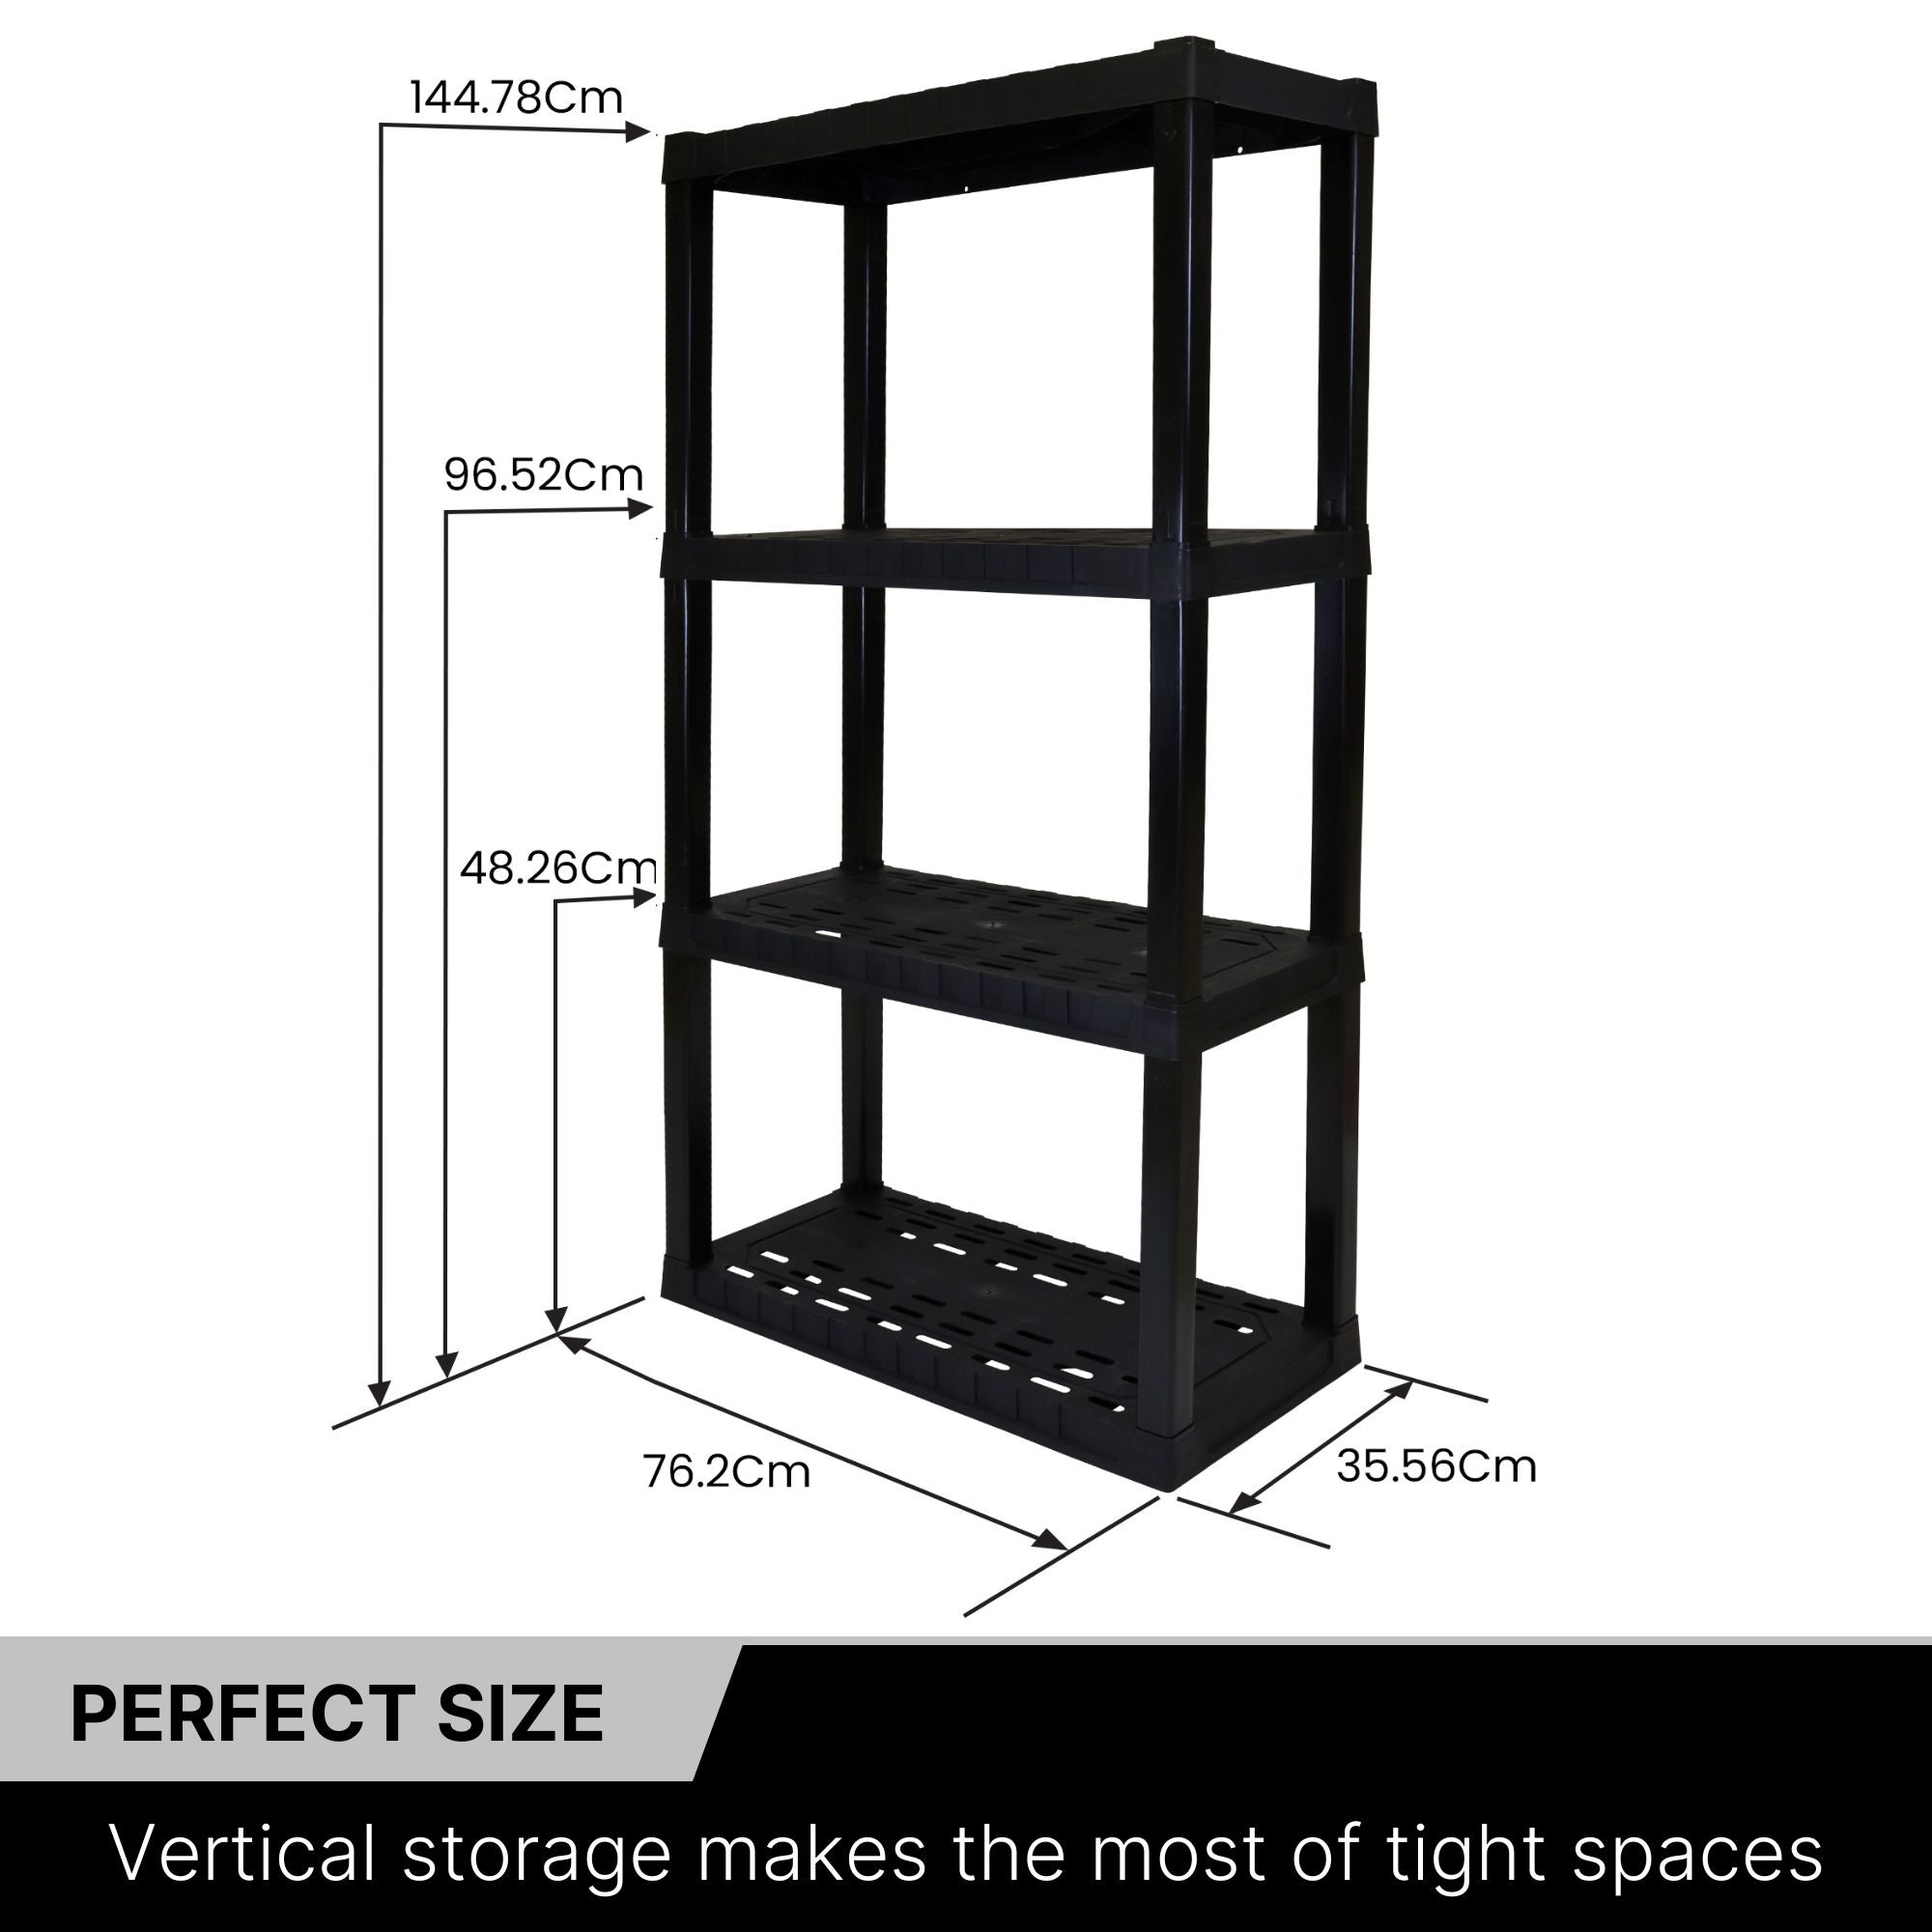 Oskar 4-Tier Storage Shelf, Holds 180 kg, H 145 X W 76 X D 36 CM, Multipurpose Organizer for Cellar, Basement, Utility Shed, Workshop, Tool-Free Assembly, Made With Recycled Materials, Black